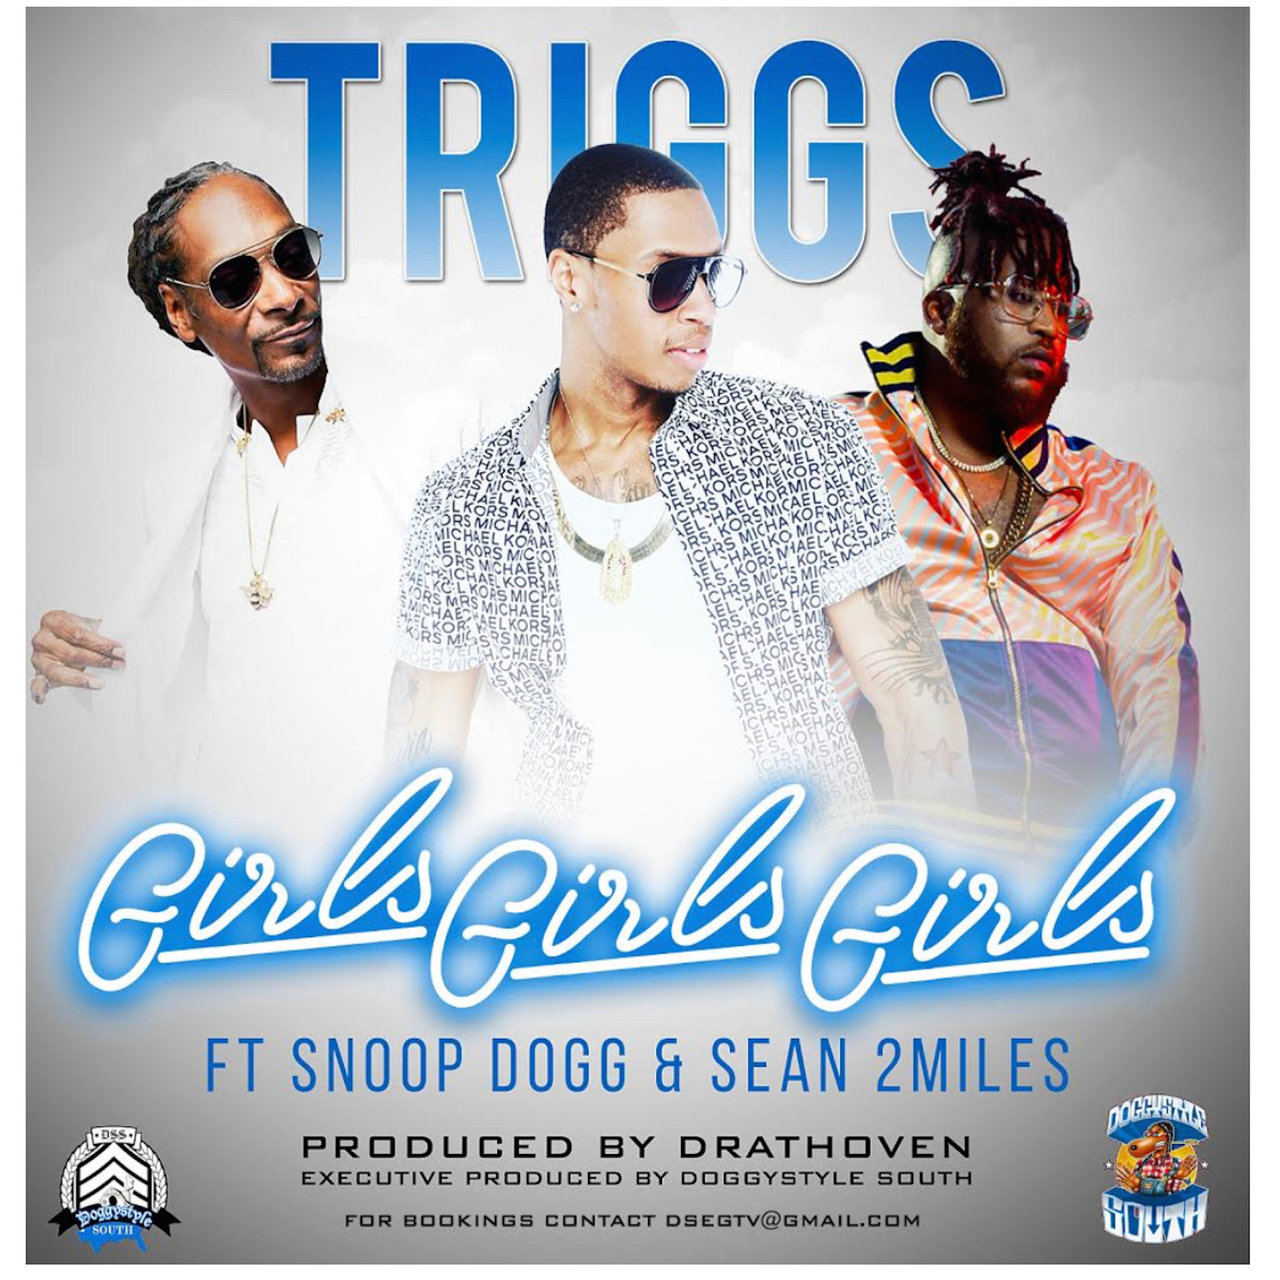 Triggs - Girls Girls Girls (ft. Snoop Dogg and Sean2miles) (Cover)